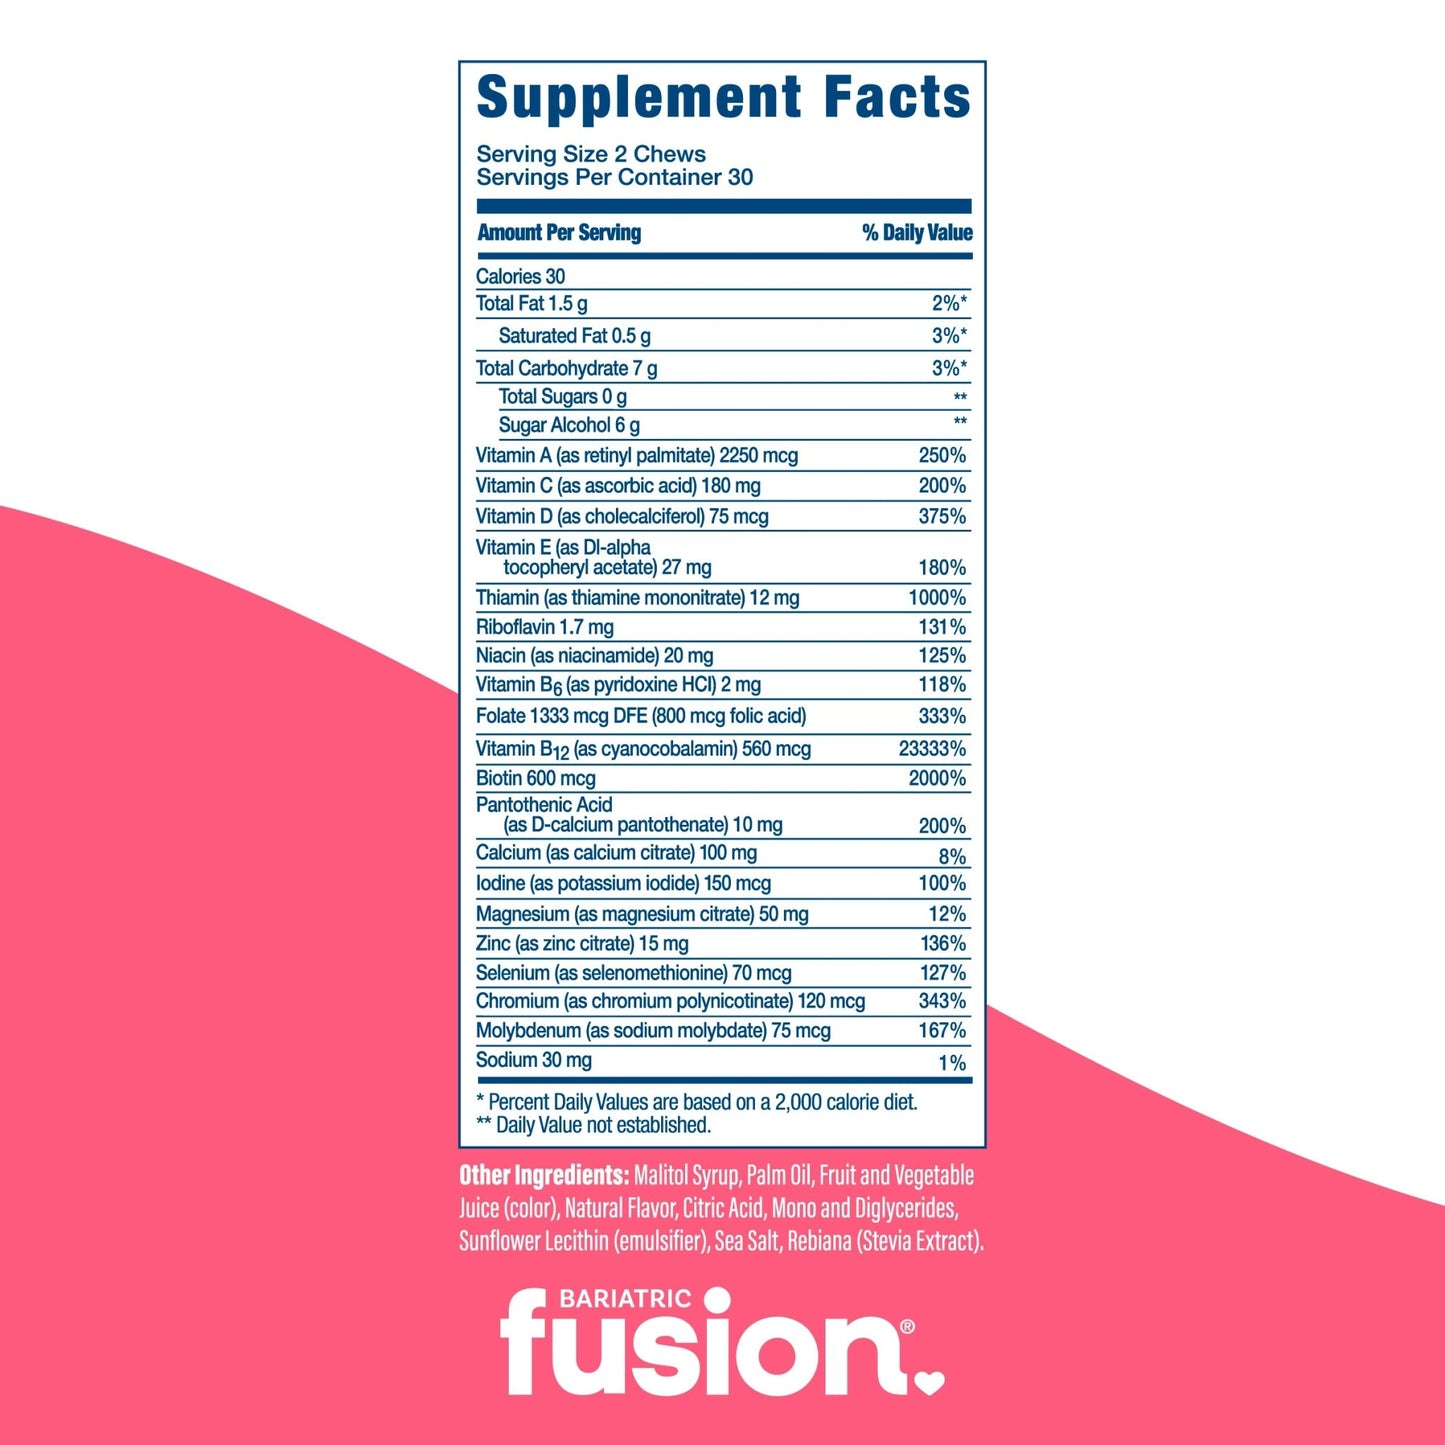 Bariatric Fusion Cherry Pineapple Bariatric Multivitamin Soft Chews supplement facts.